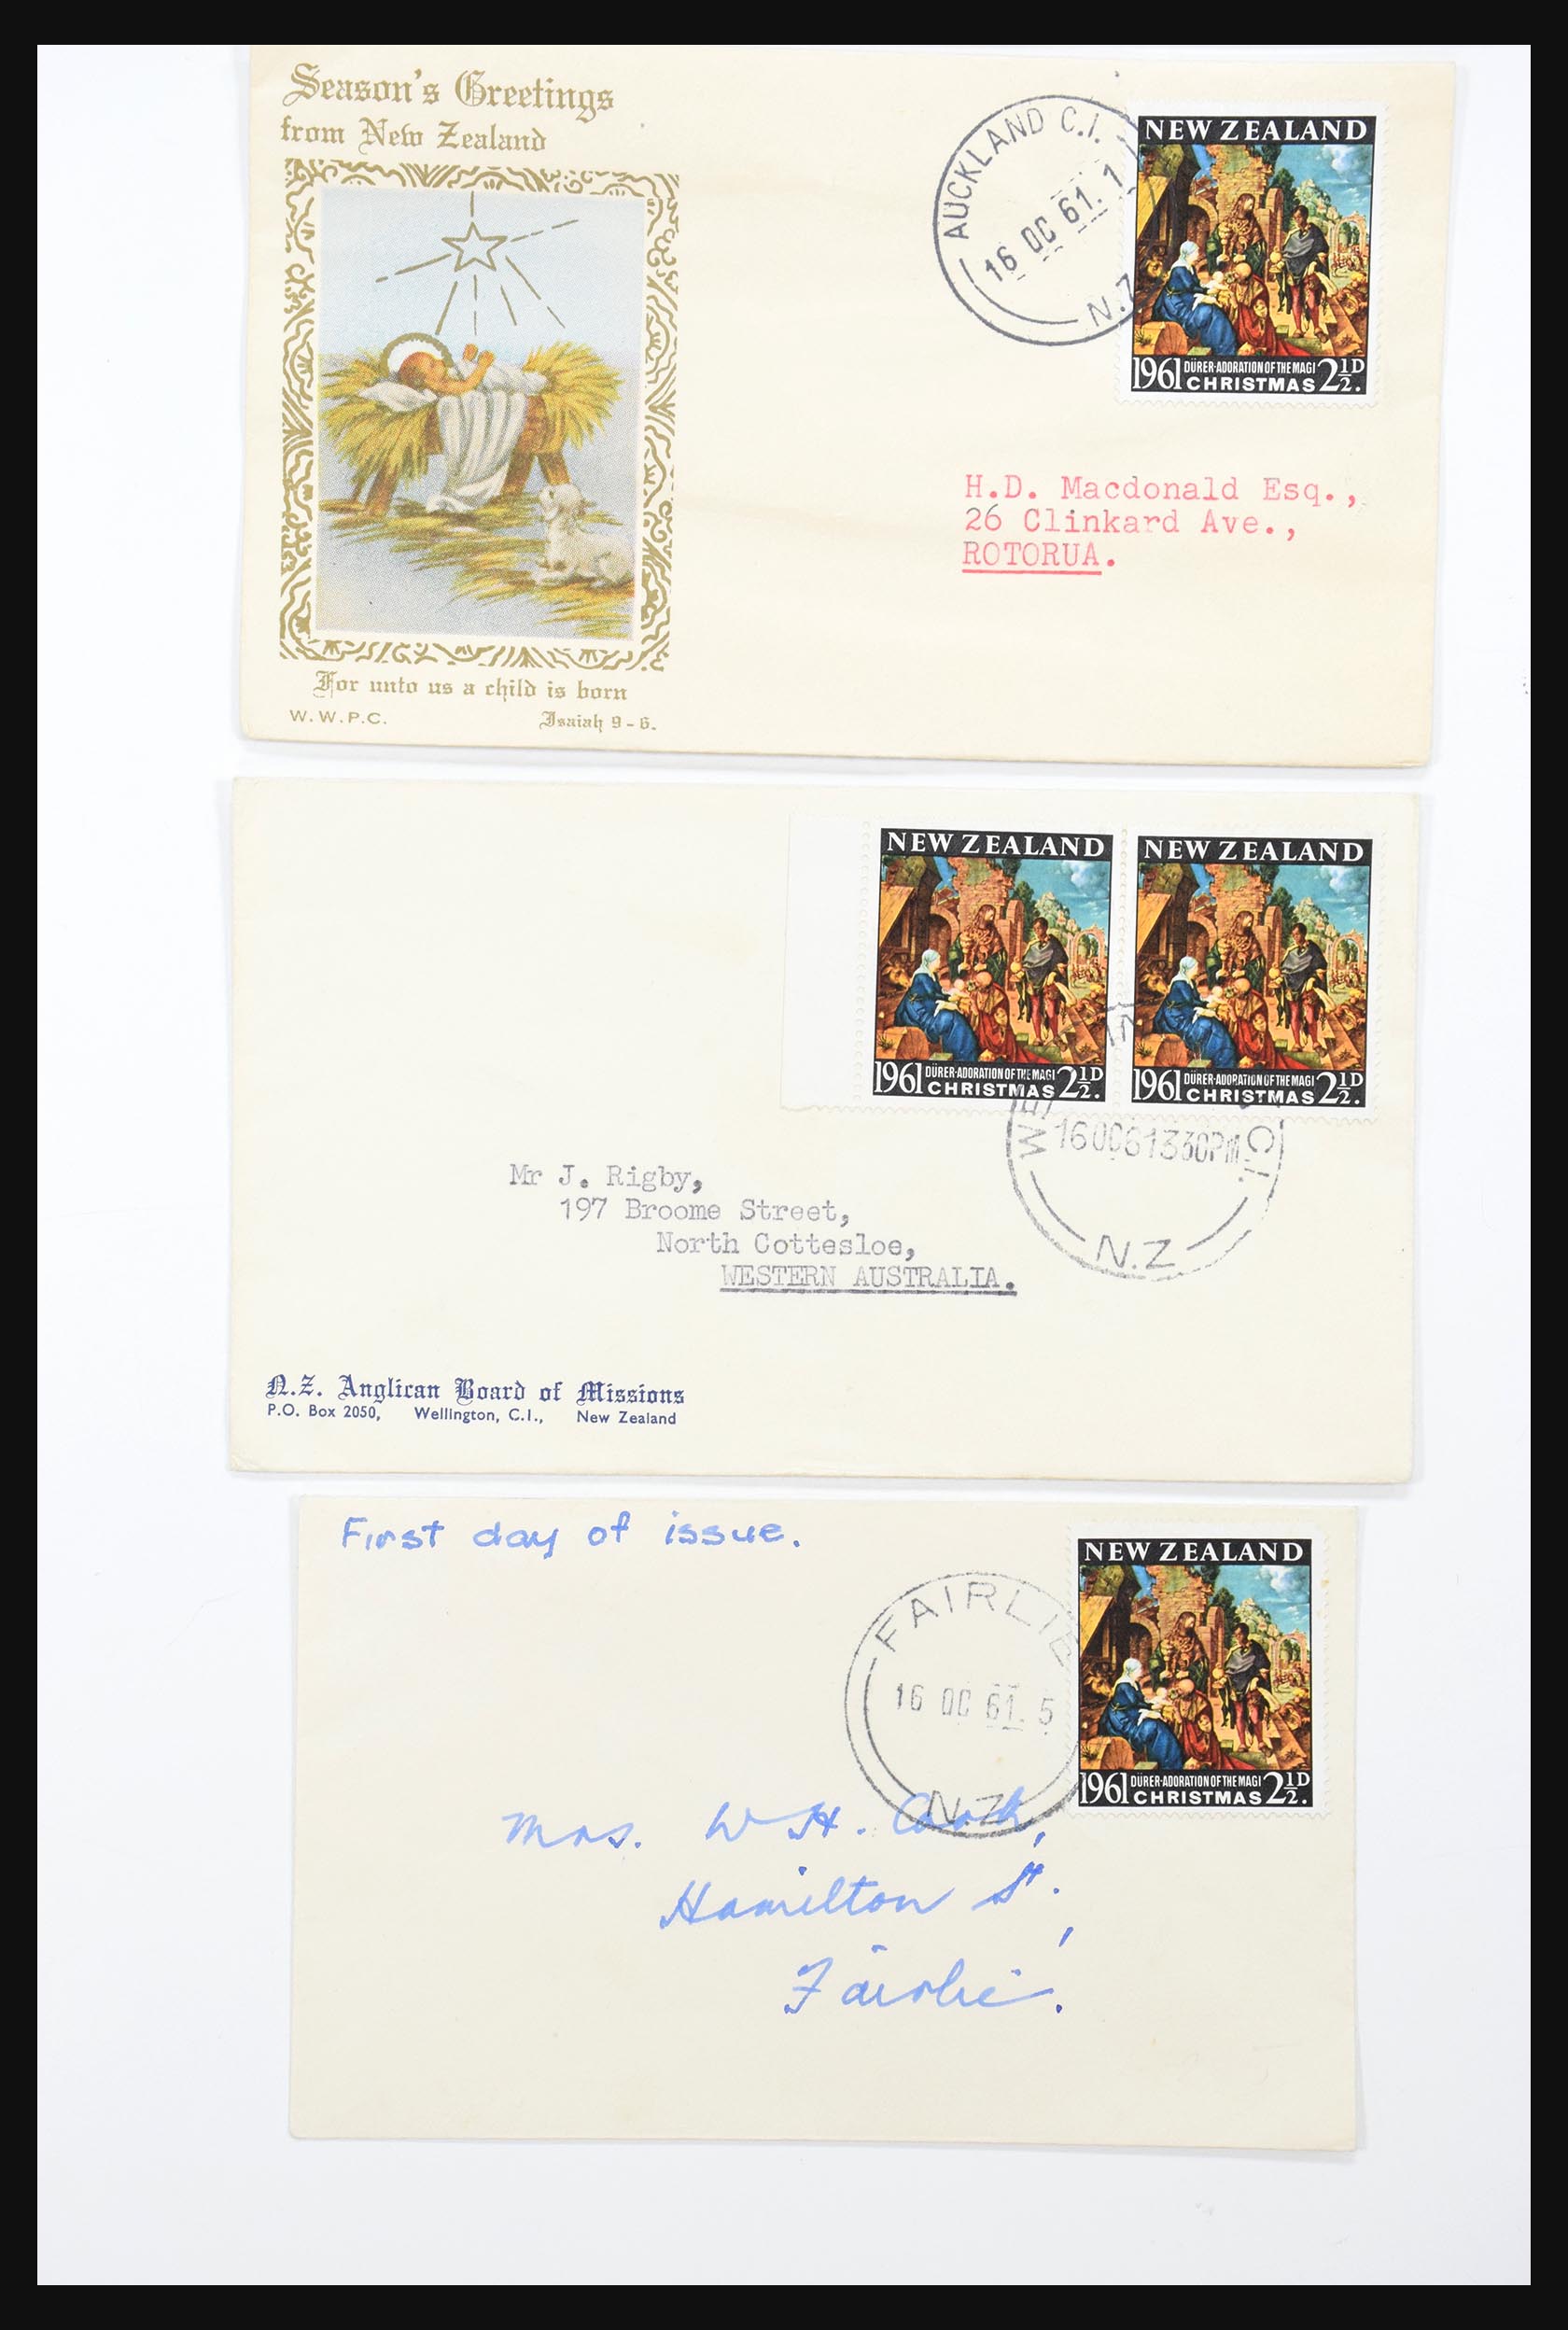 30821 027 - 30821 New Zealand FDC's 1960-1971.